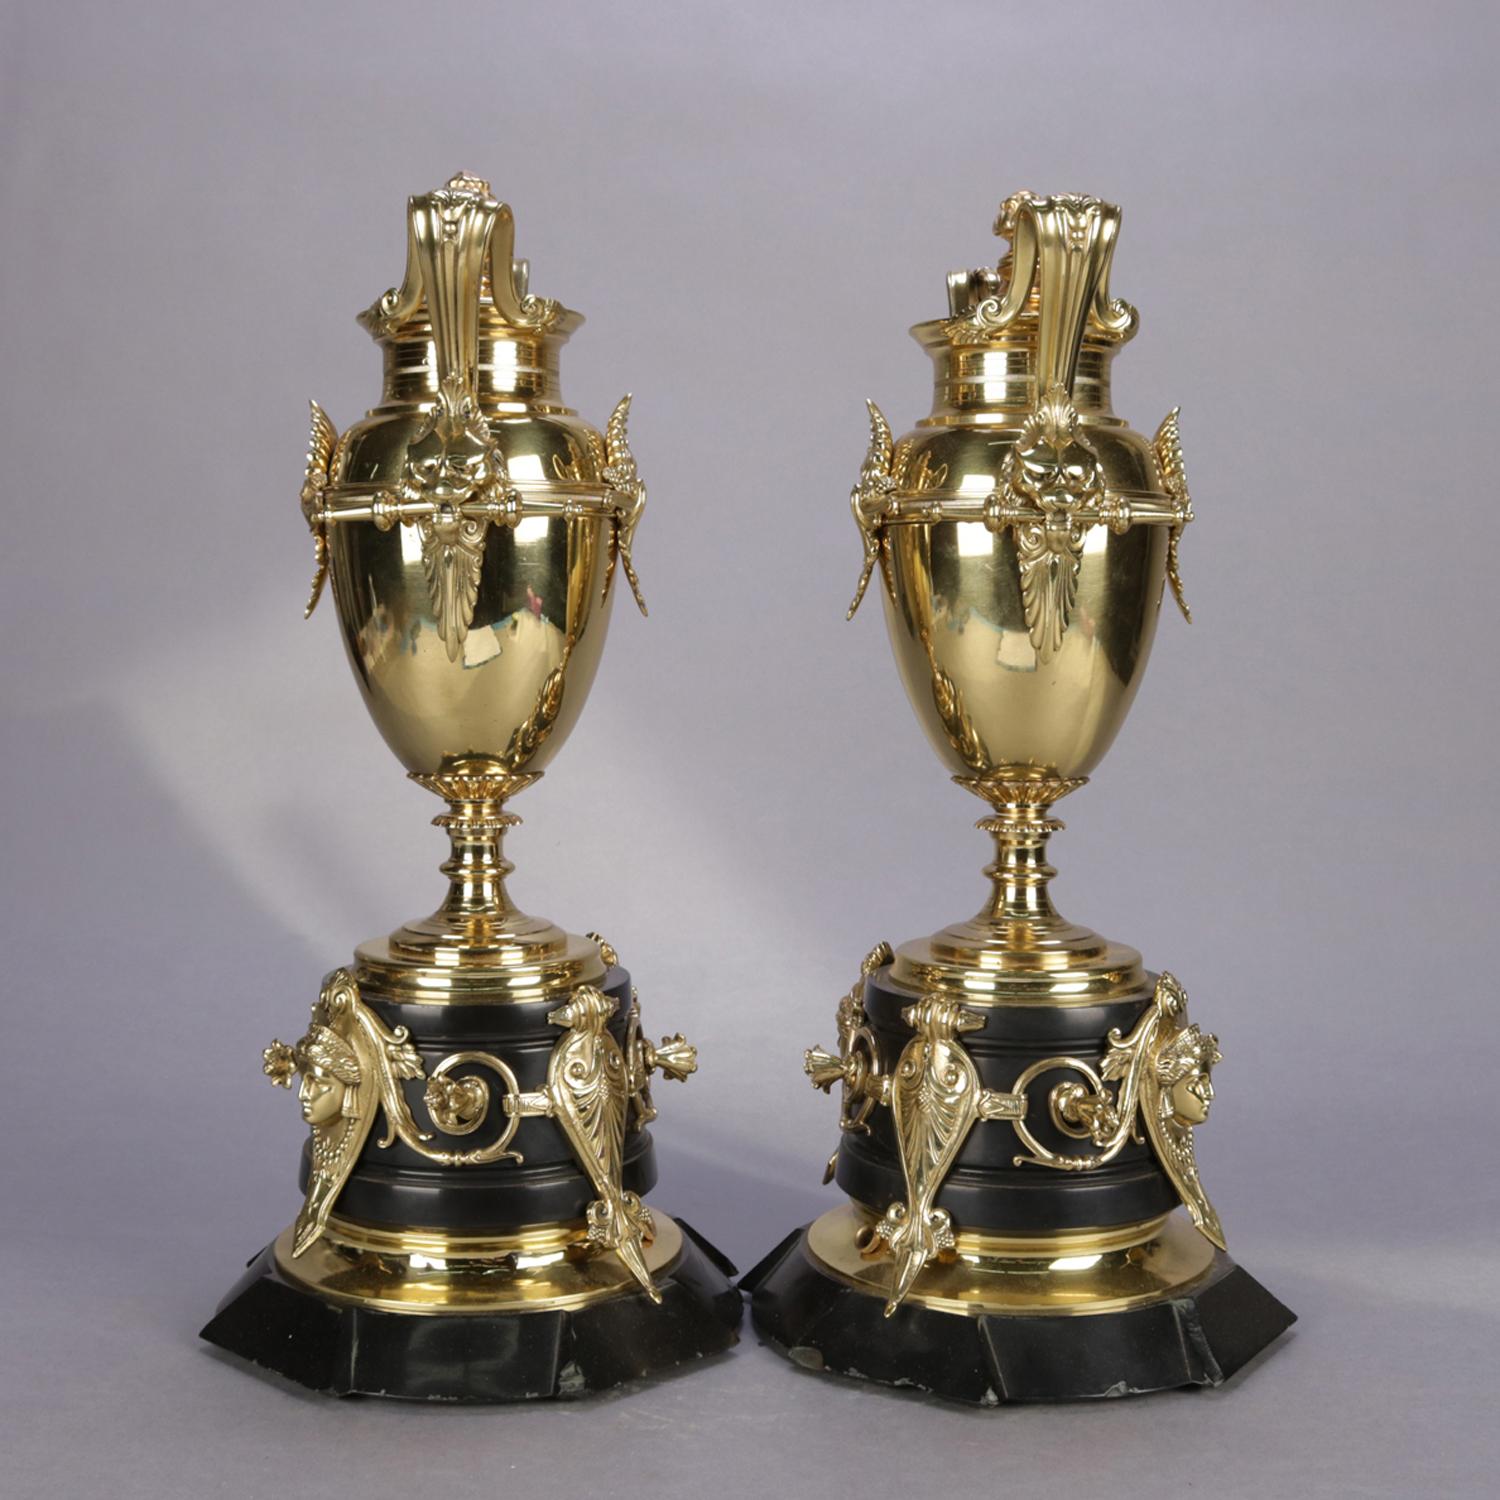 Pair of Italian figural Egyptian Revival urns feature polished bronze double handle urns having scroll form handles with masks and seated on stepped marble bases with scroll and foliate decoration with Cleopatra masks, cord receiver for lamp